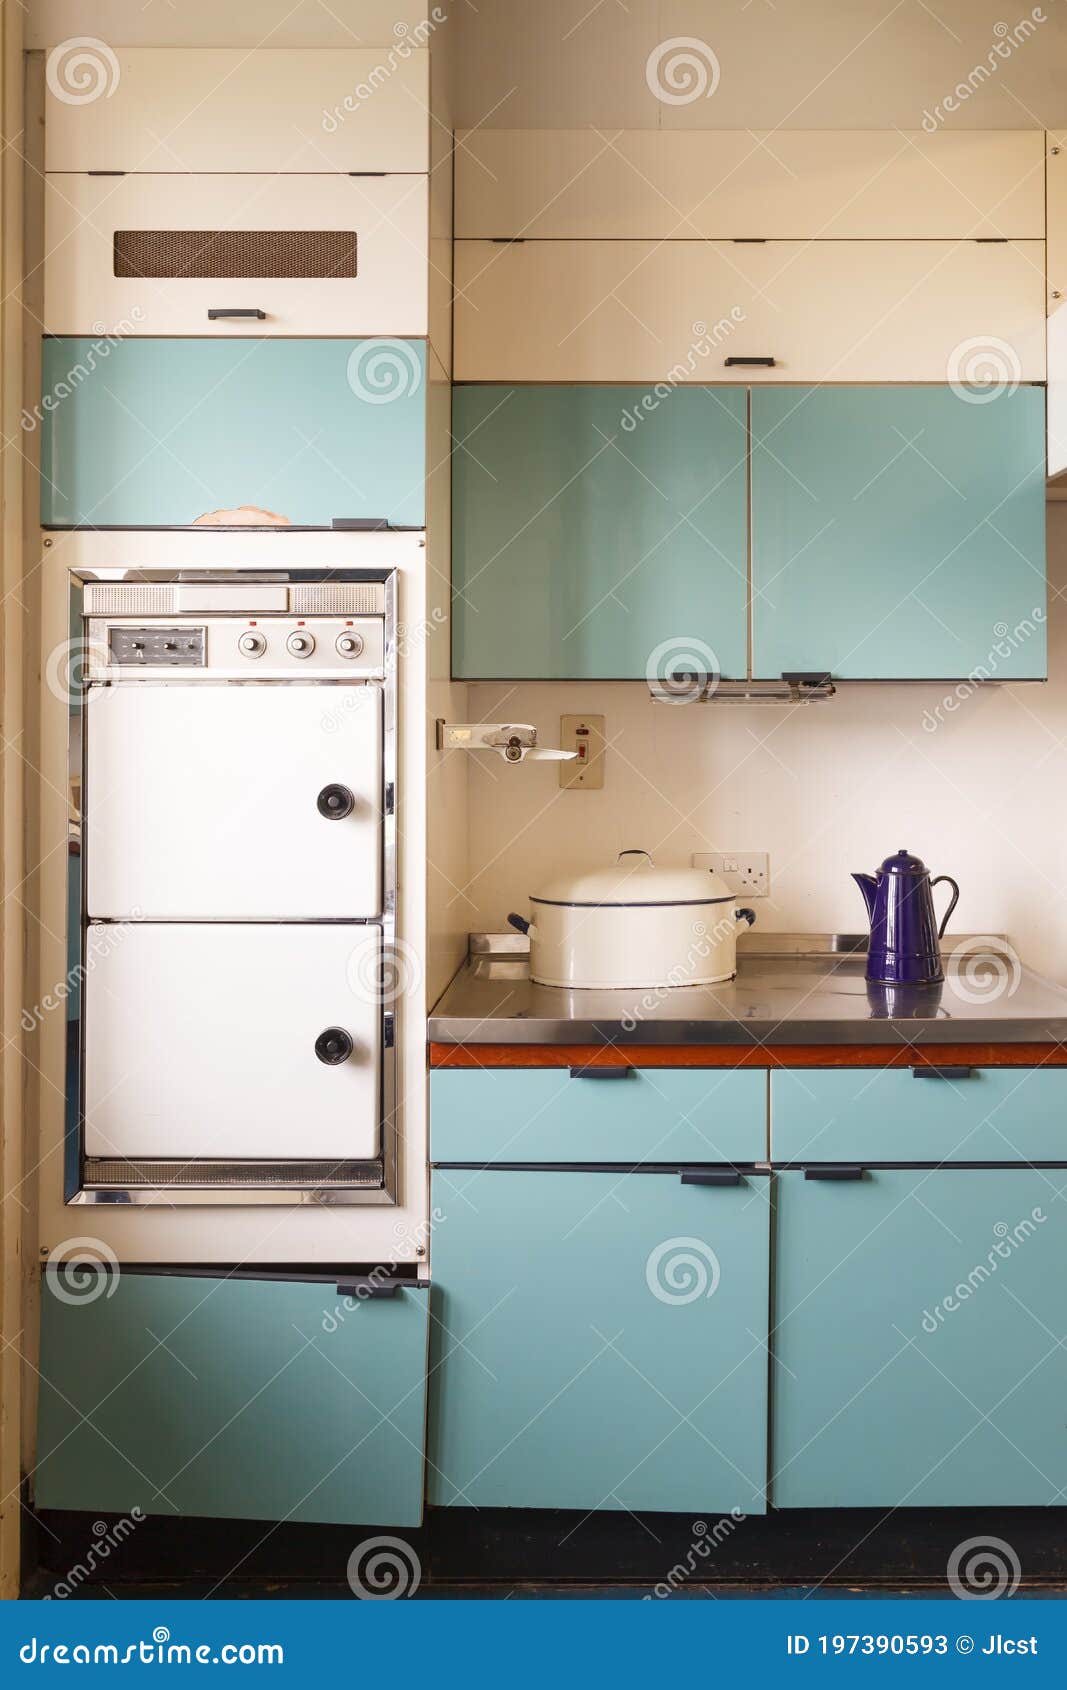 !960s retrofitted blue kitchen in disrepair with electric oven.